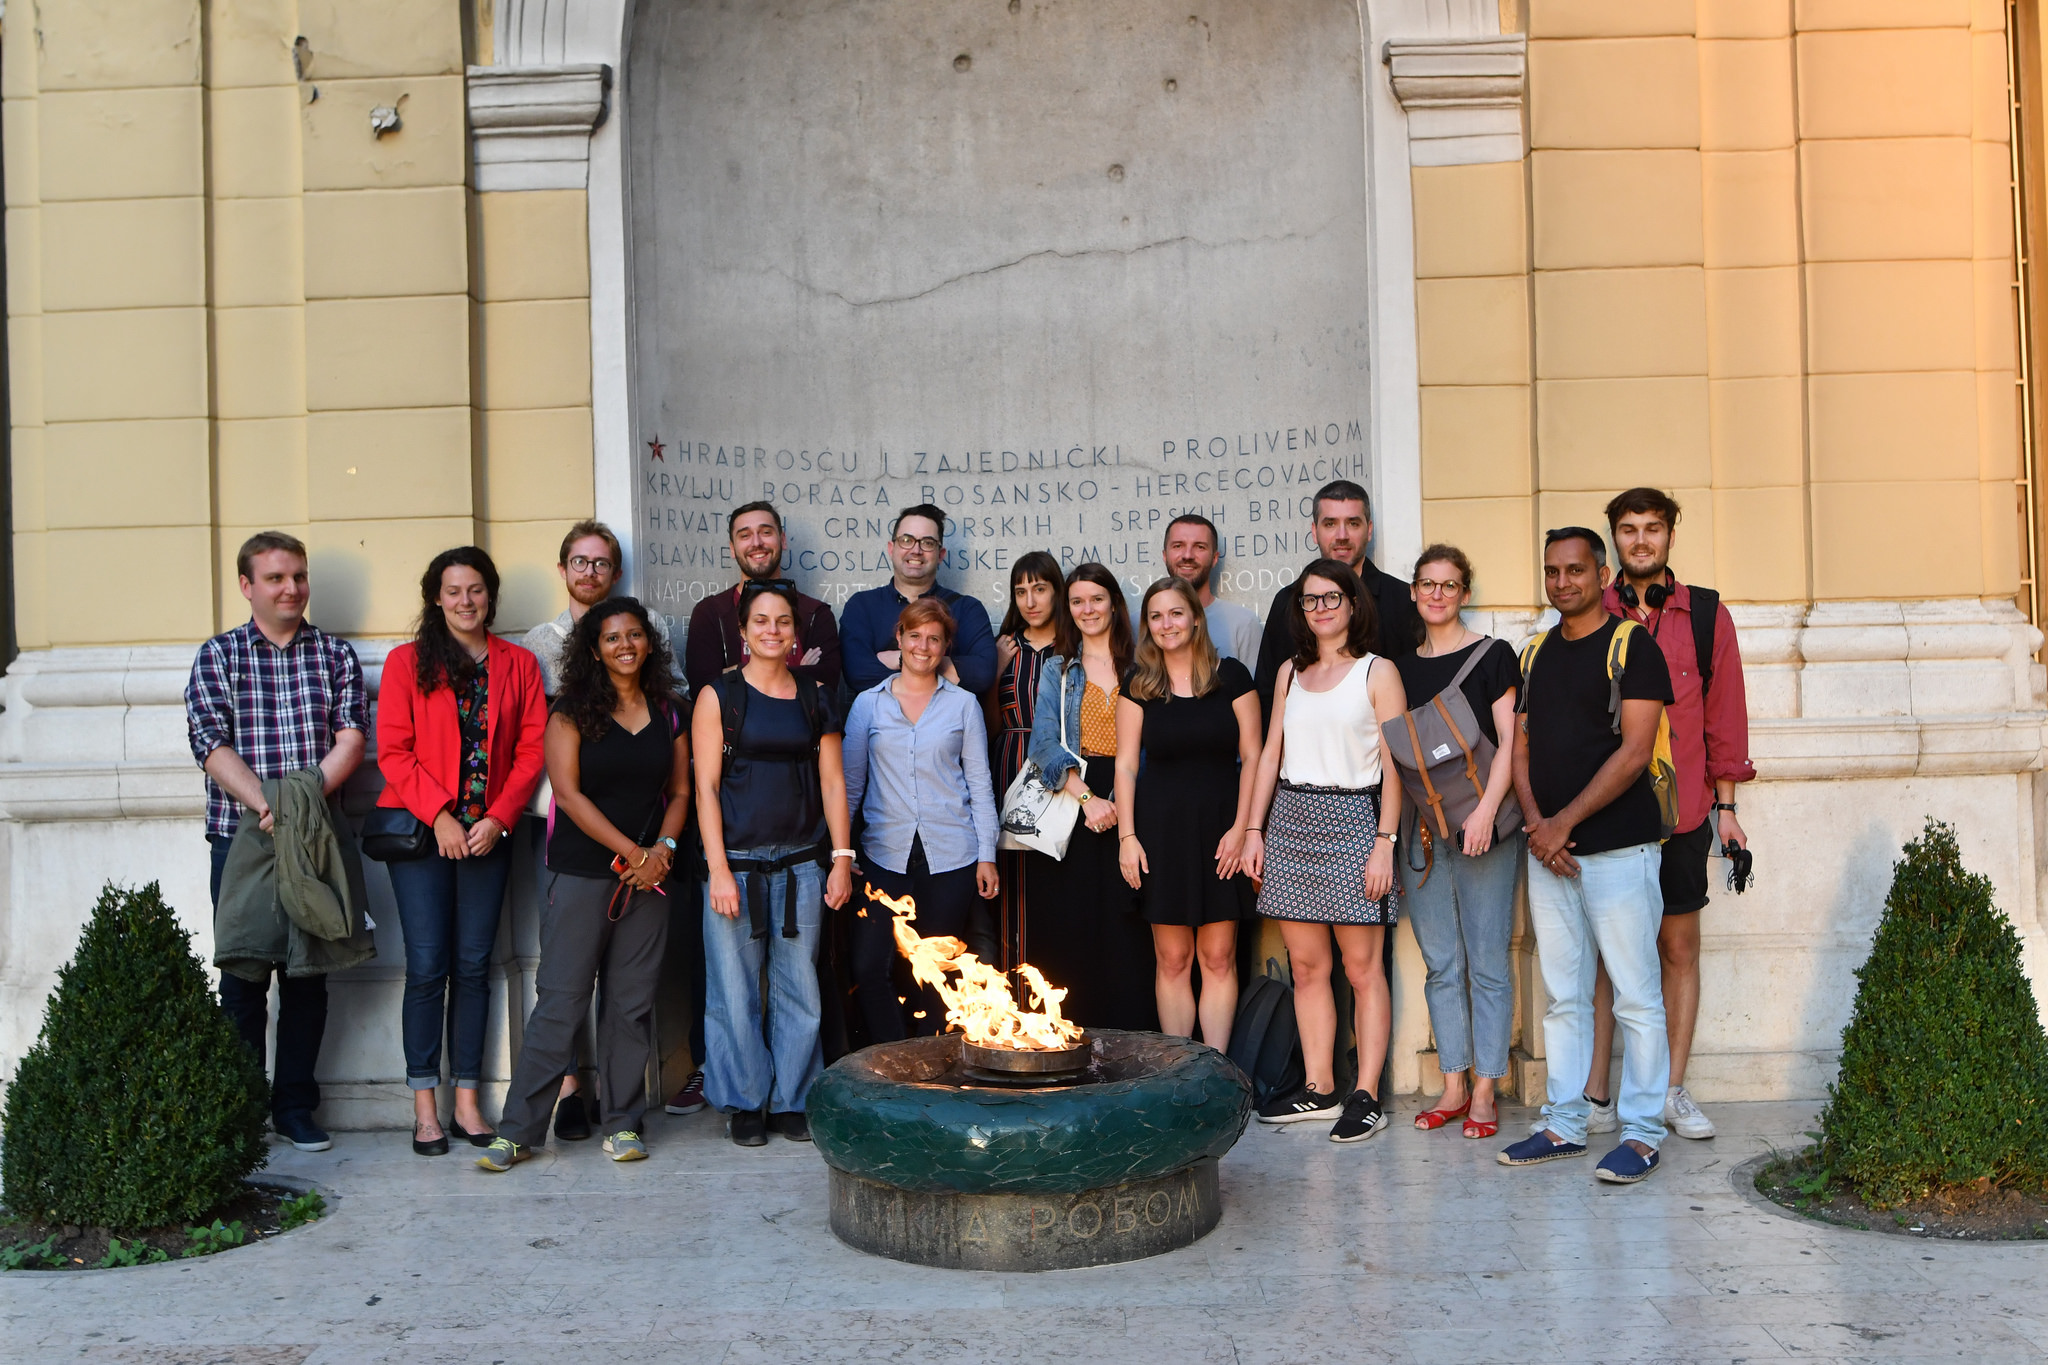 Bosnian election study tour group in front of the Eternal flame memorial in Sarajevo. Credit: Kemal Softić/iac Berlin